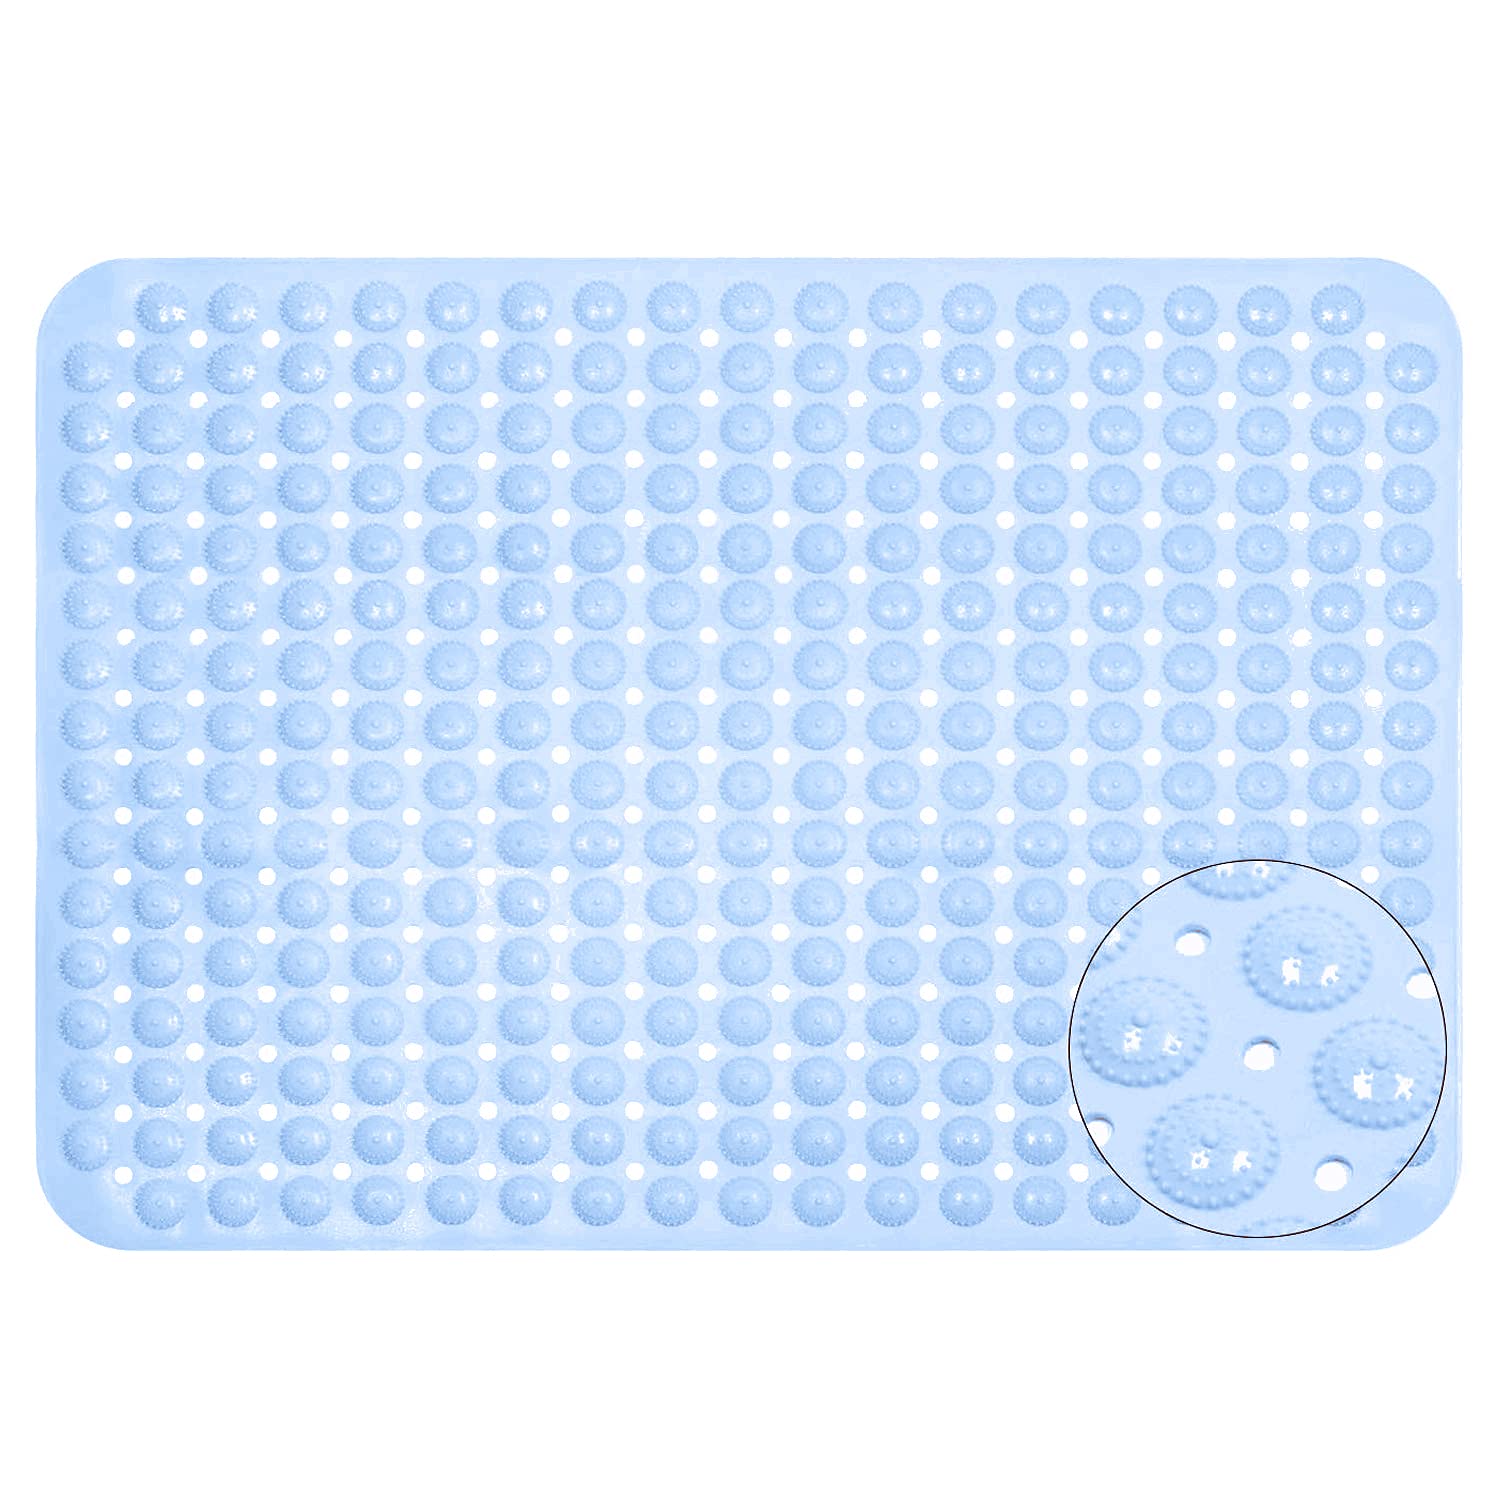 Experia Anti Slip Bath Mat with Suction Cup - 106 X 60 CM (Blue Color with Accu Pebble) LifeKrafts